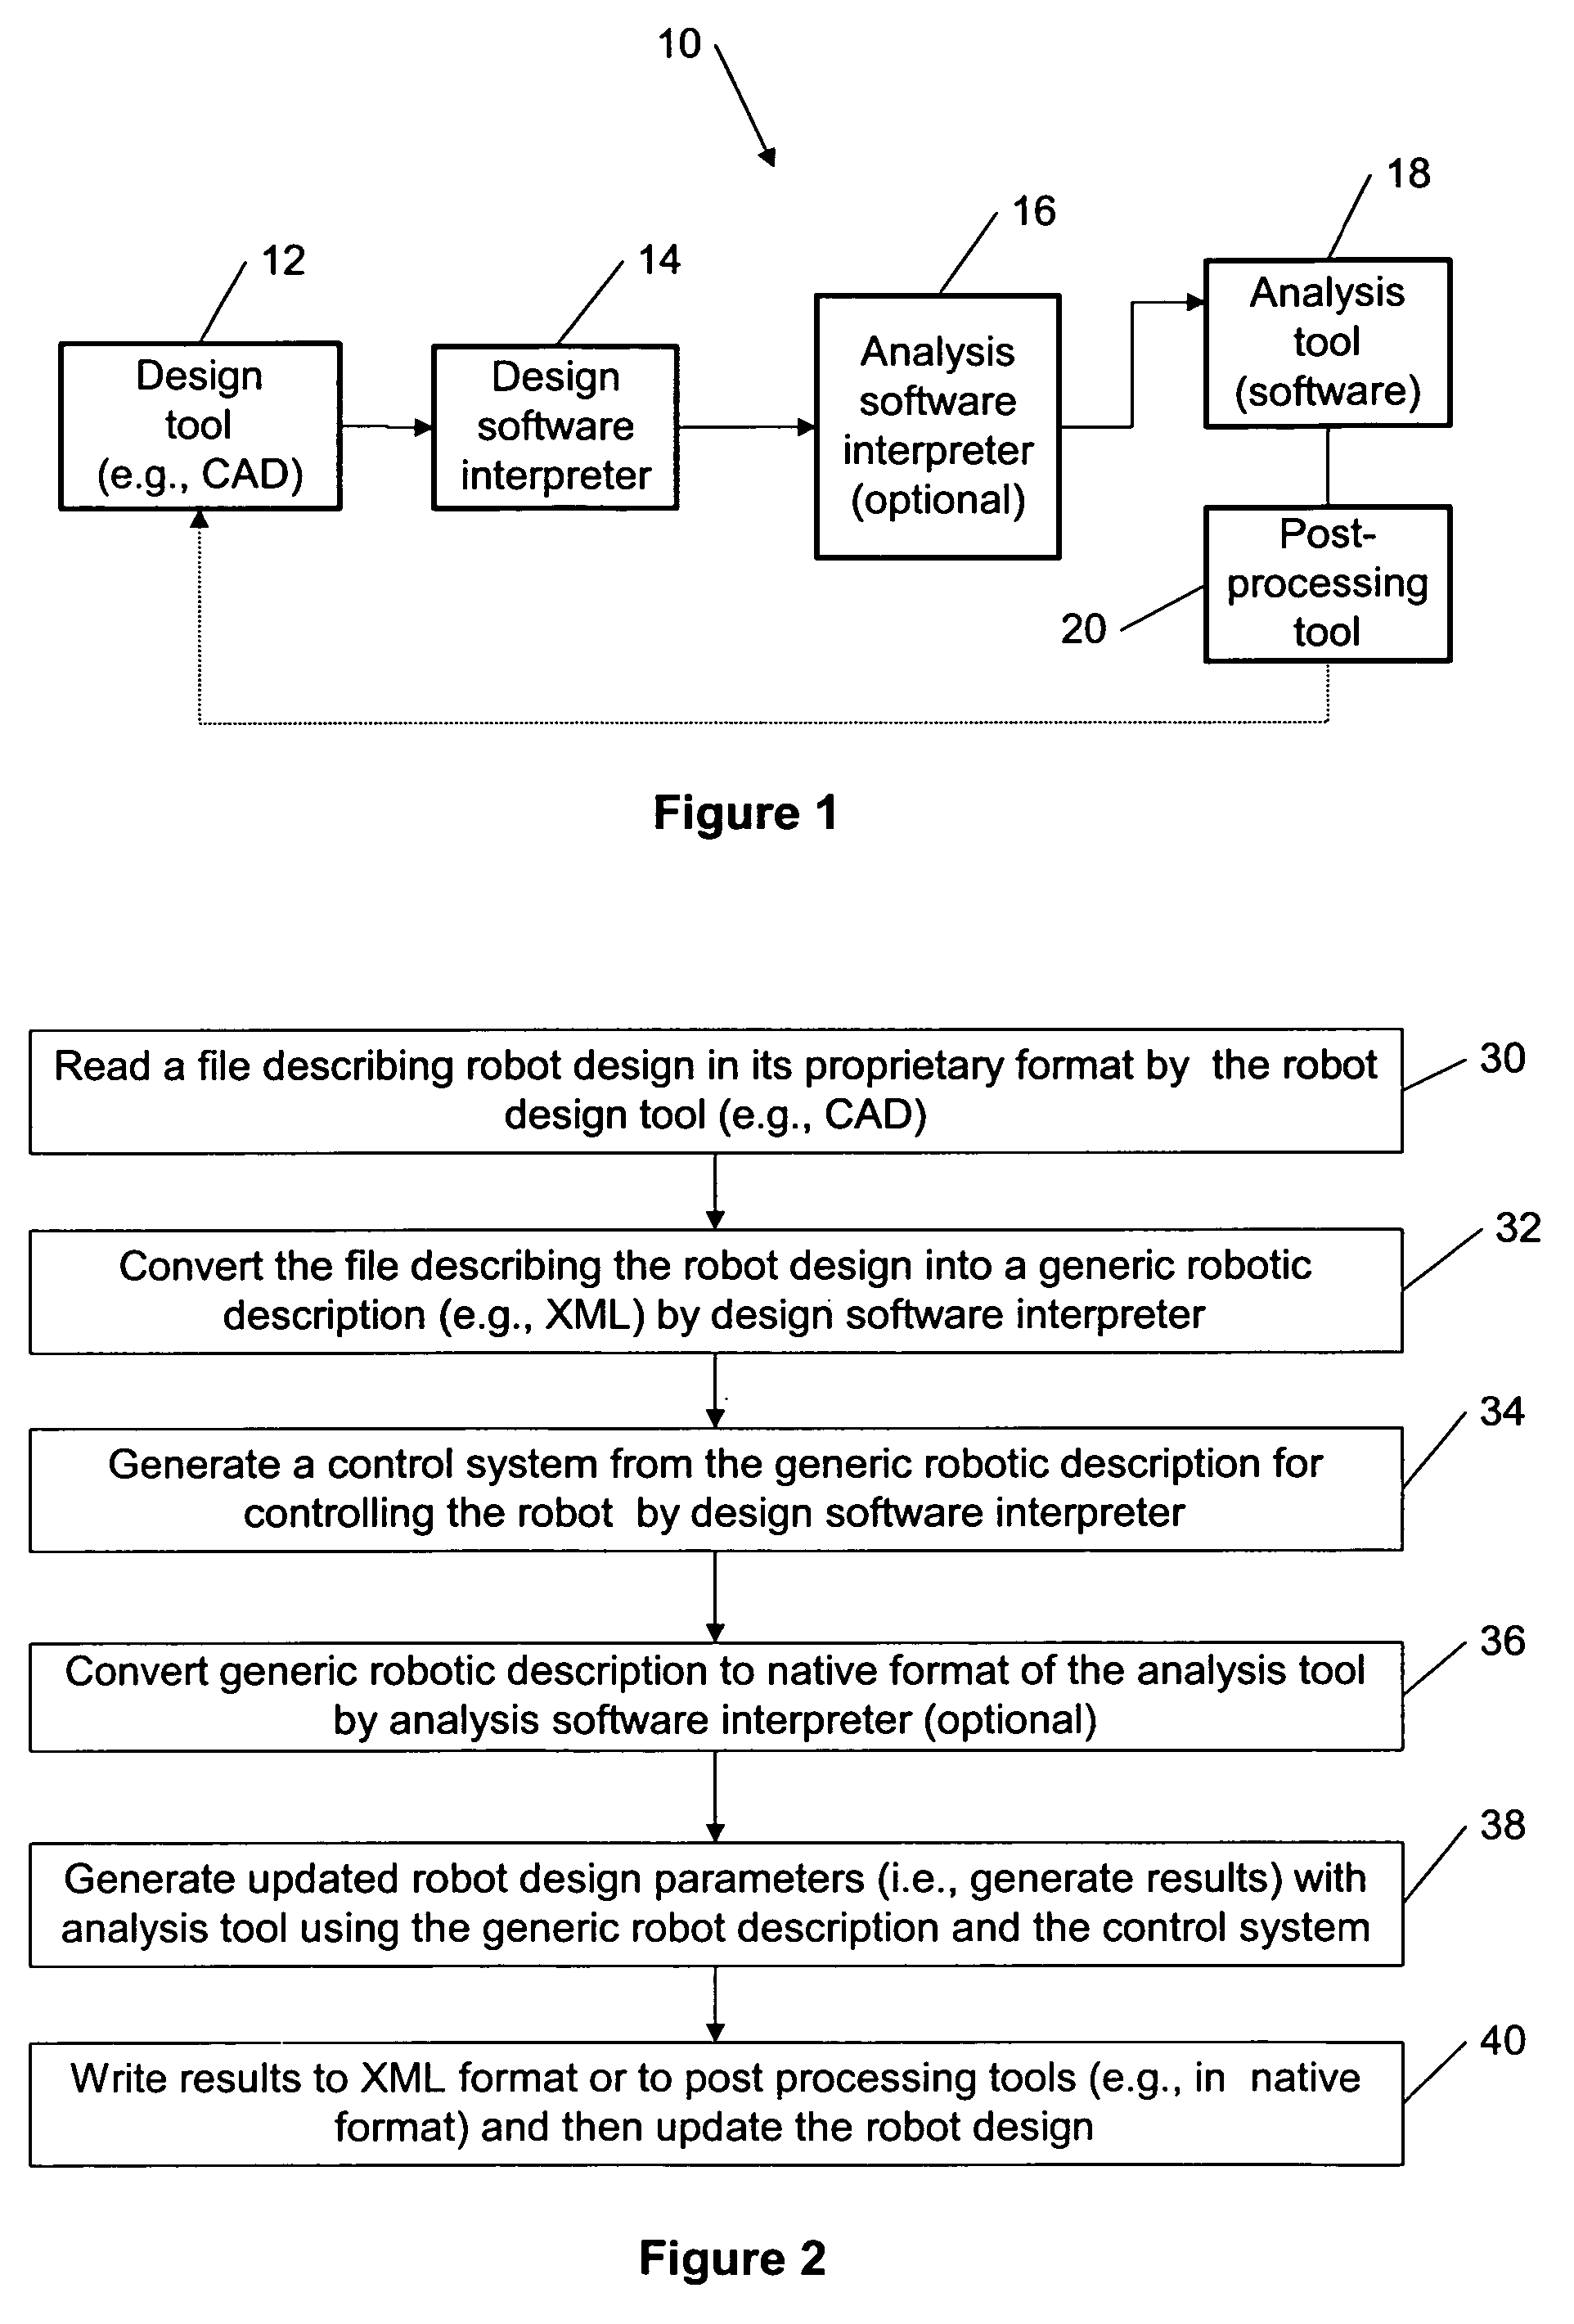 Automatic control system generation for robot design validation